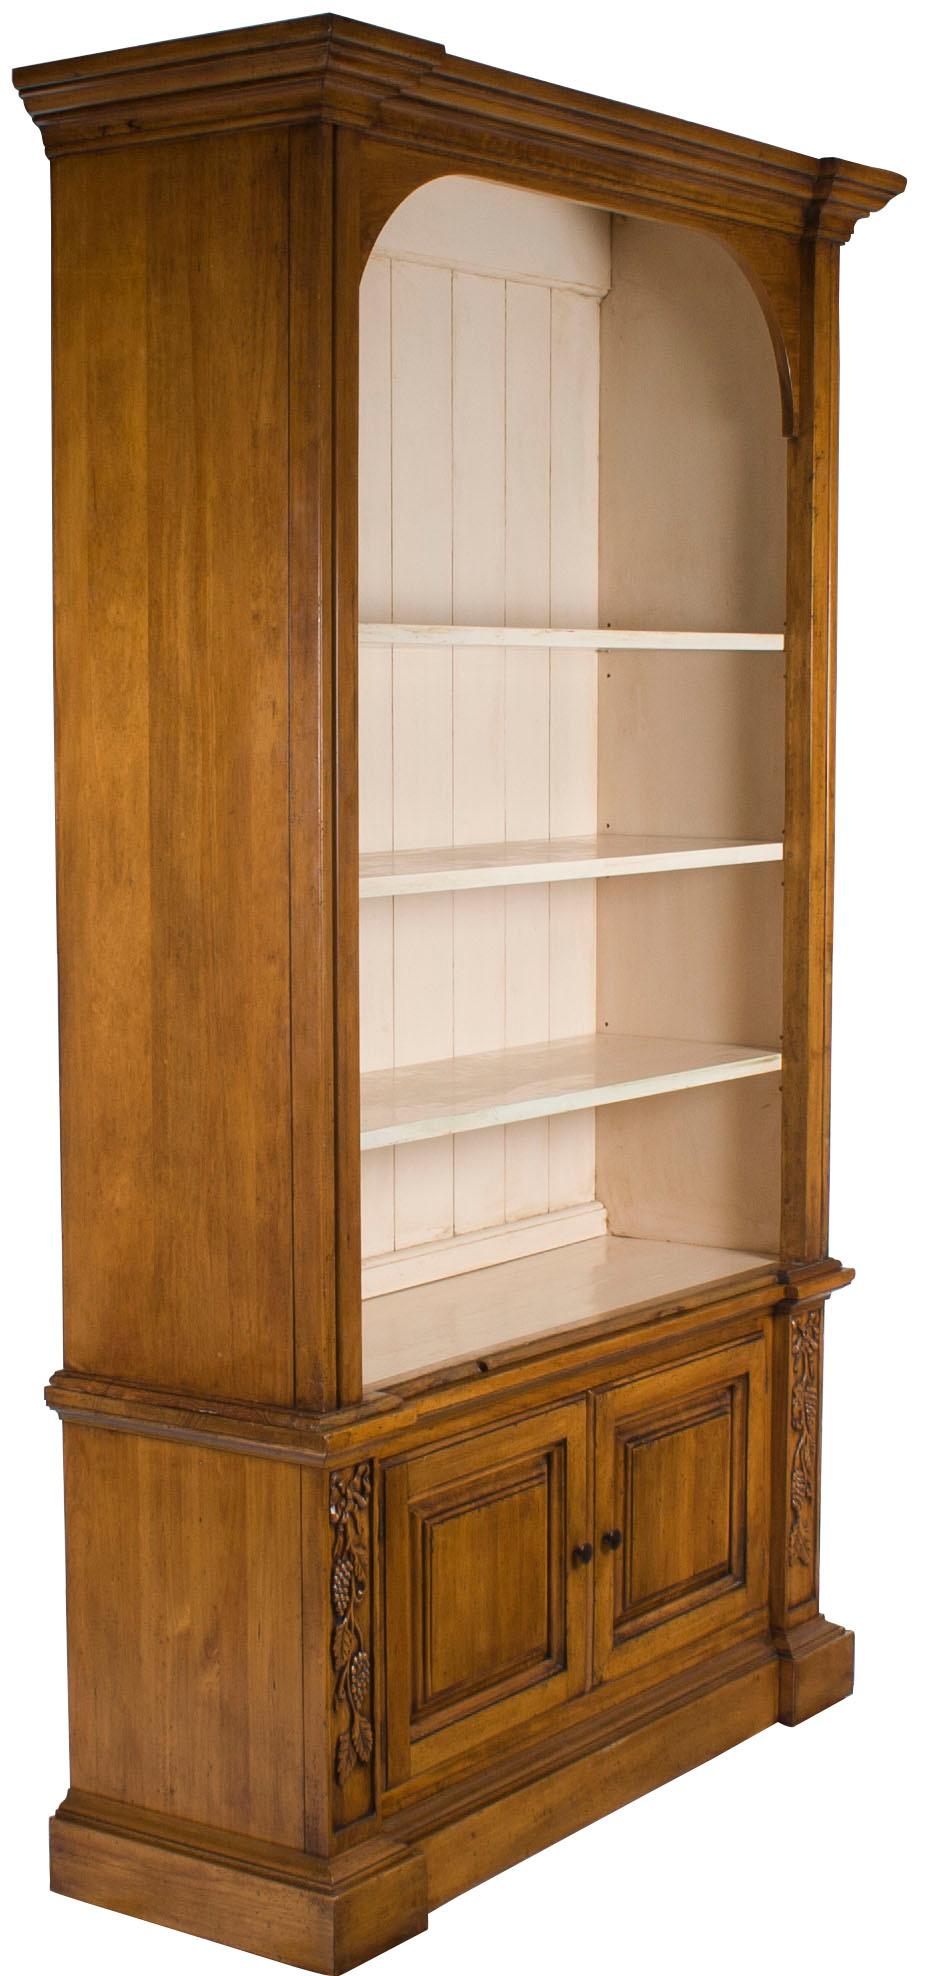 The arched opening on this tall bookcase provides an elegant space for display of just about anything! Made from a combination of classic English design and stunning rustic pine wood, this bookcase is sure to look stunning in any home or office